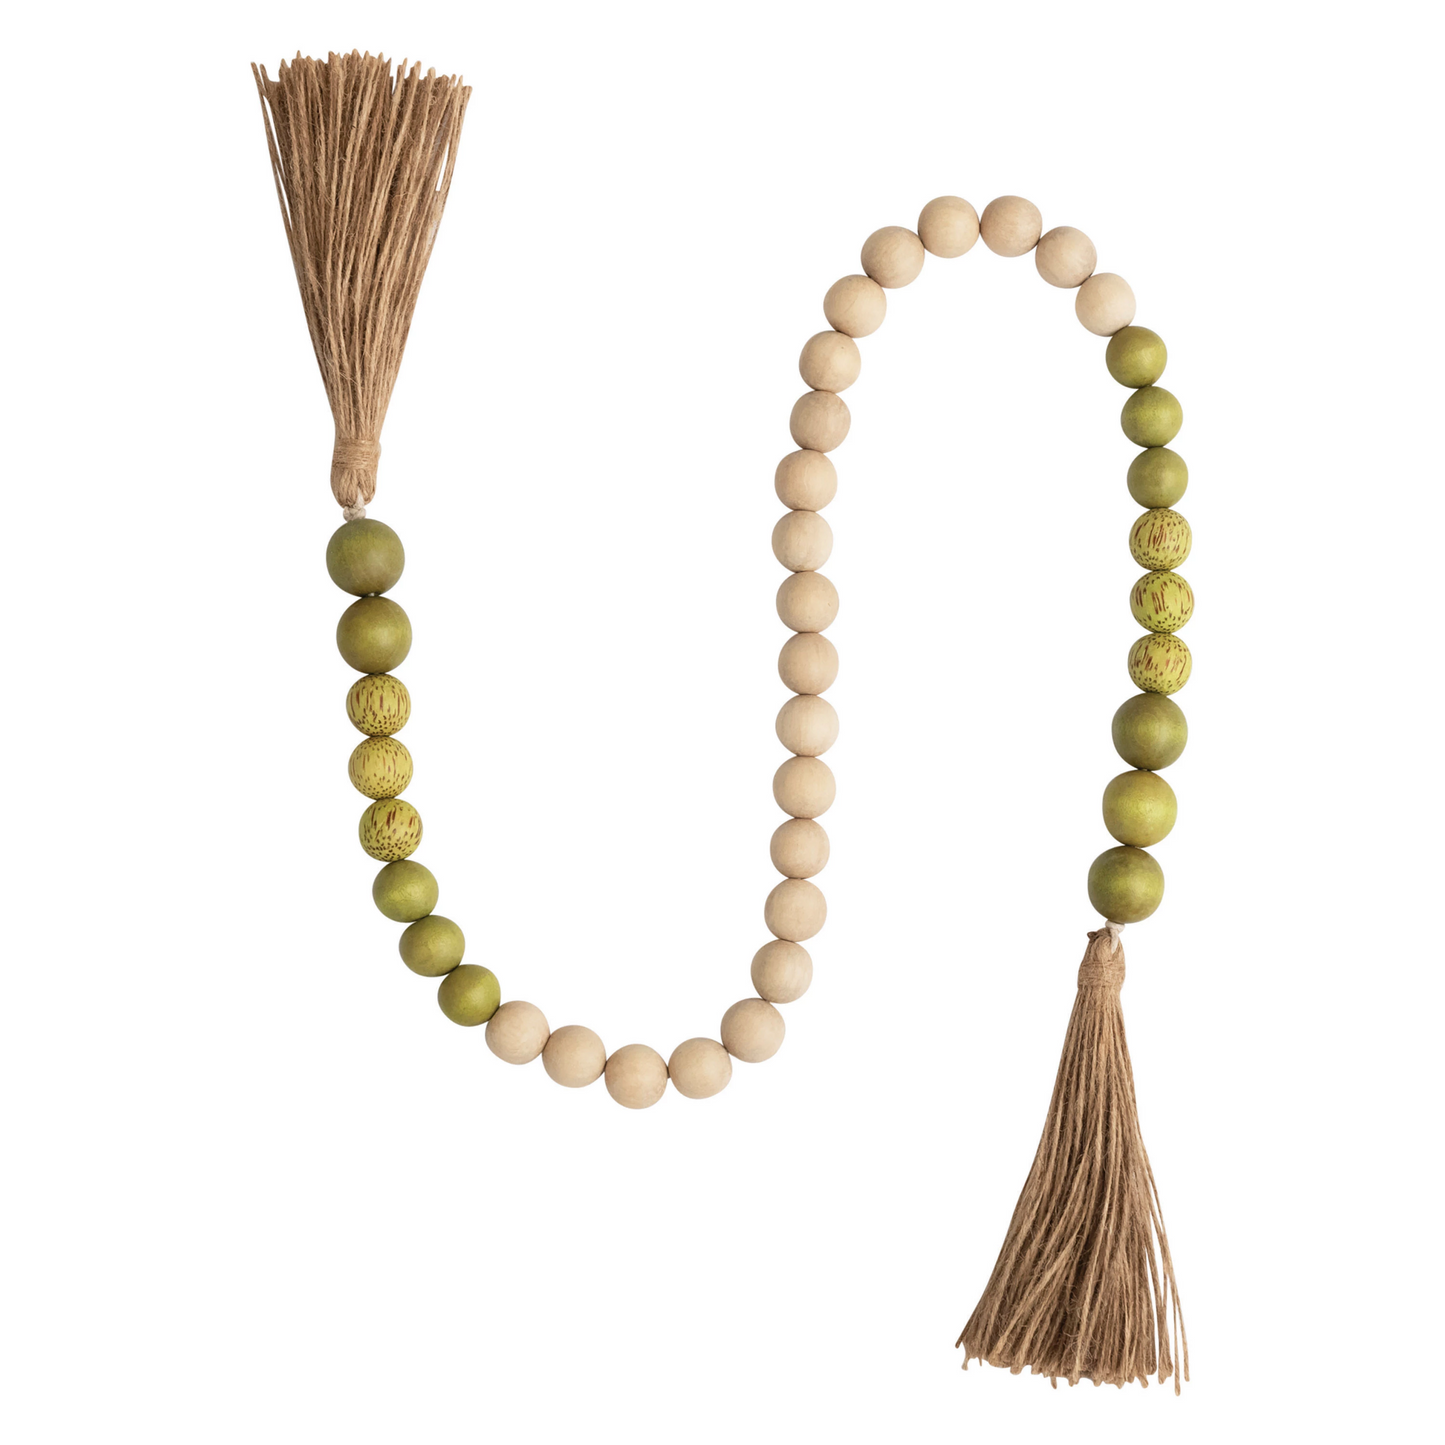 Wood and Coco Shell Bead Garland with Jute Tassels - Green and White - 41-1/2-in - Mellow Monkey